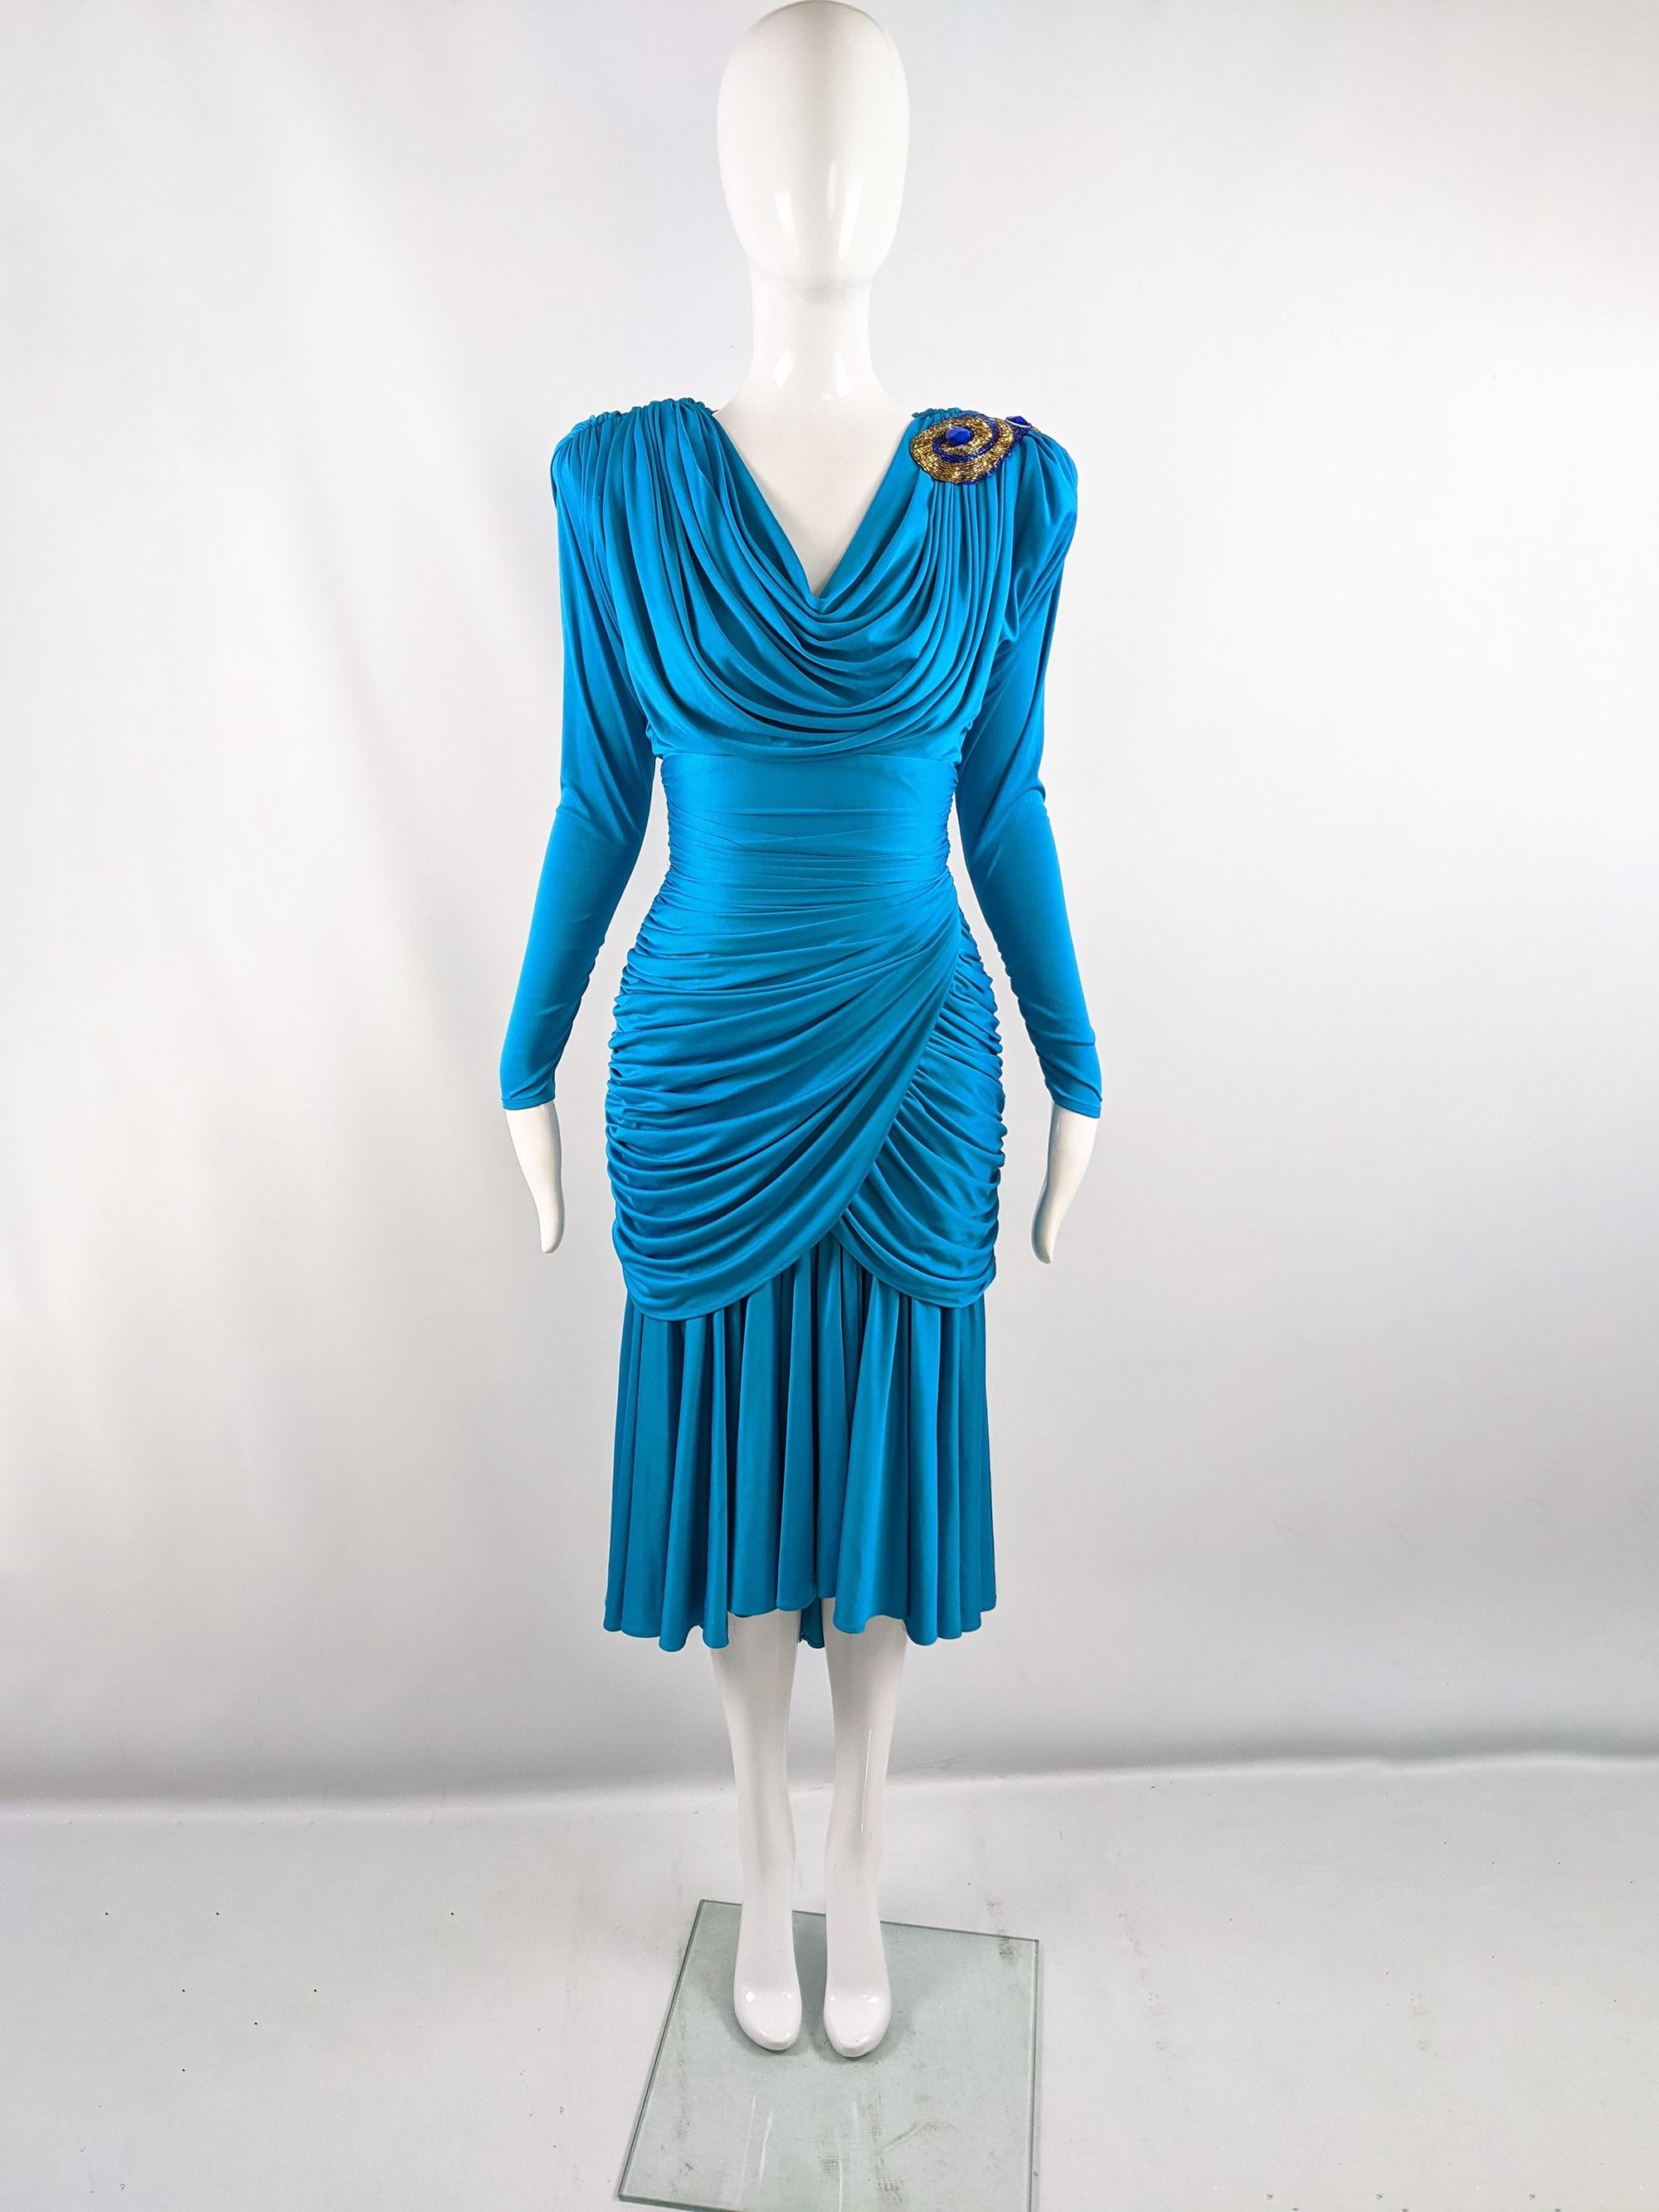 An incredible vintage womens party dress from the 80s by luxury fashion designer, Tadashi Shoji. In a blue slinky synthetic jersey which gives beautiful drape. The shoulders are padded and the bodice and hips are ruched which makes the waist appear